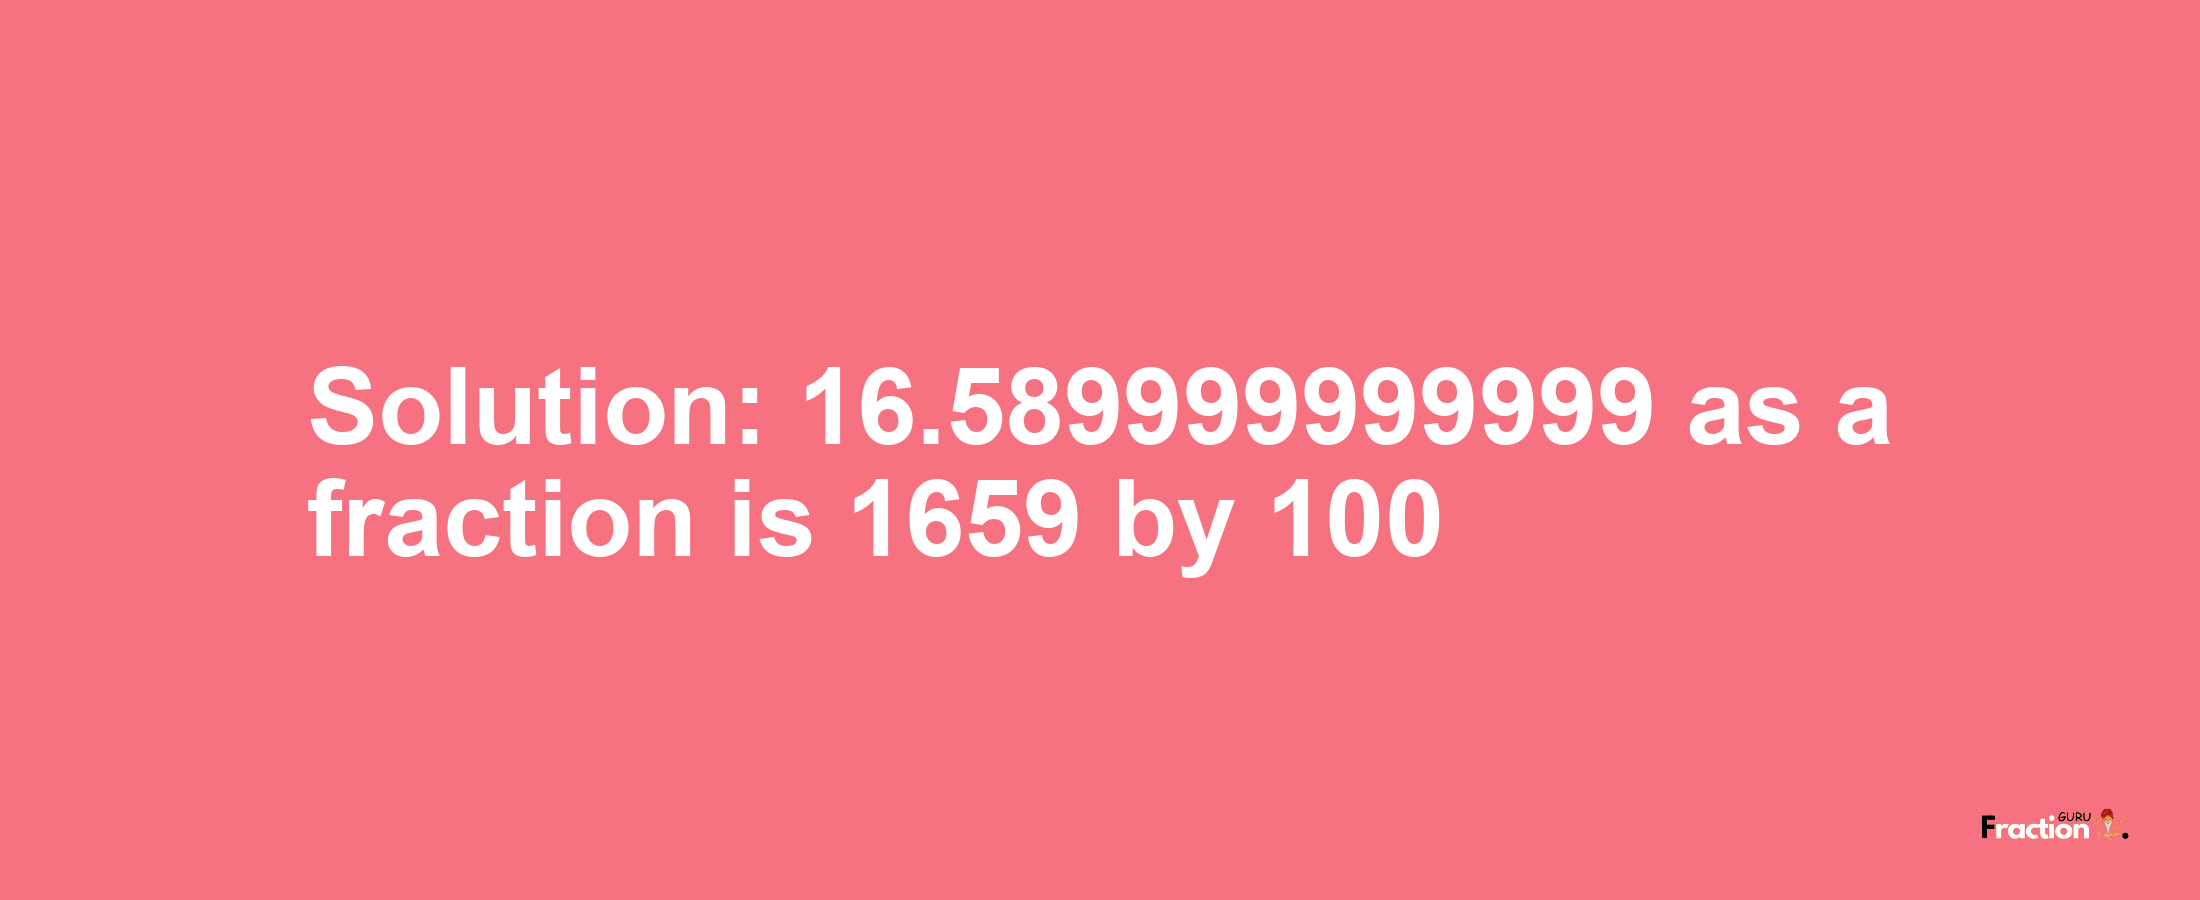 Solution:16.589999999999 as a fraction is 1659/100